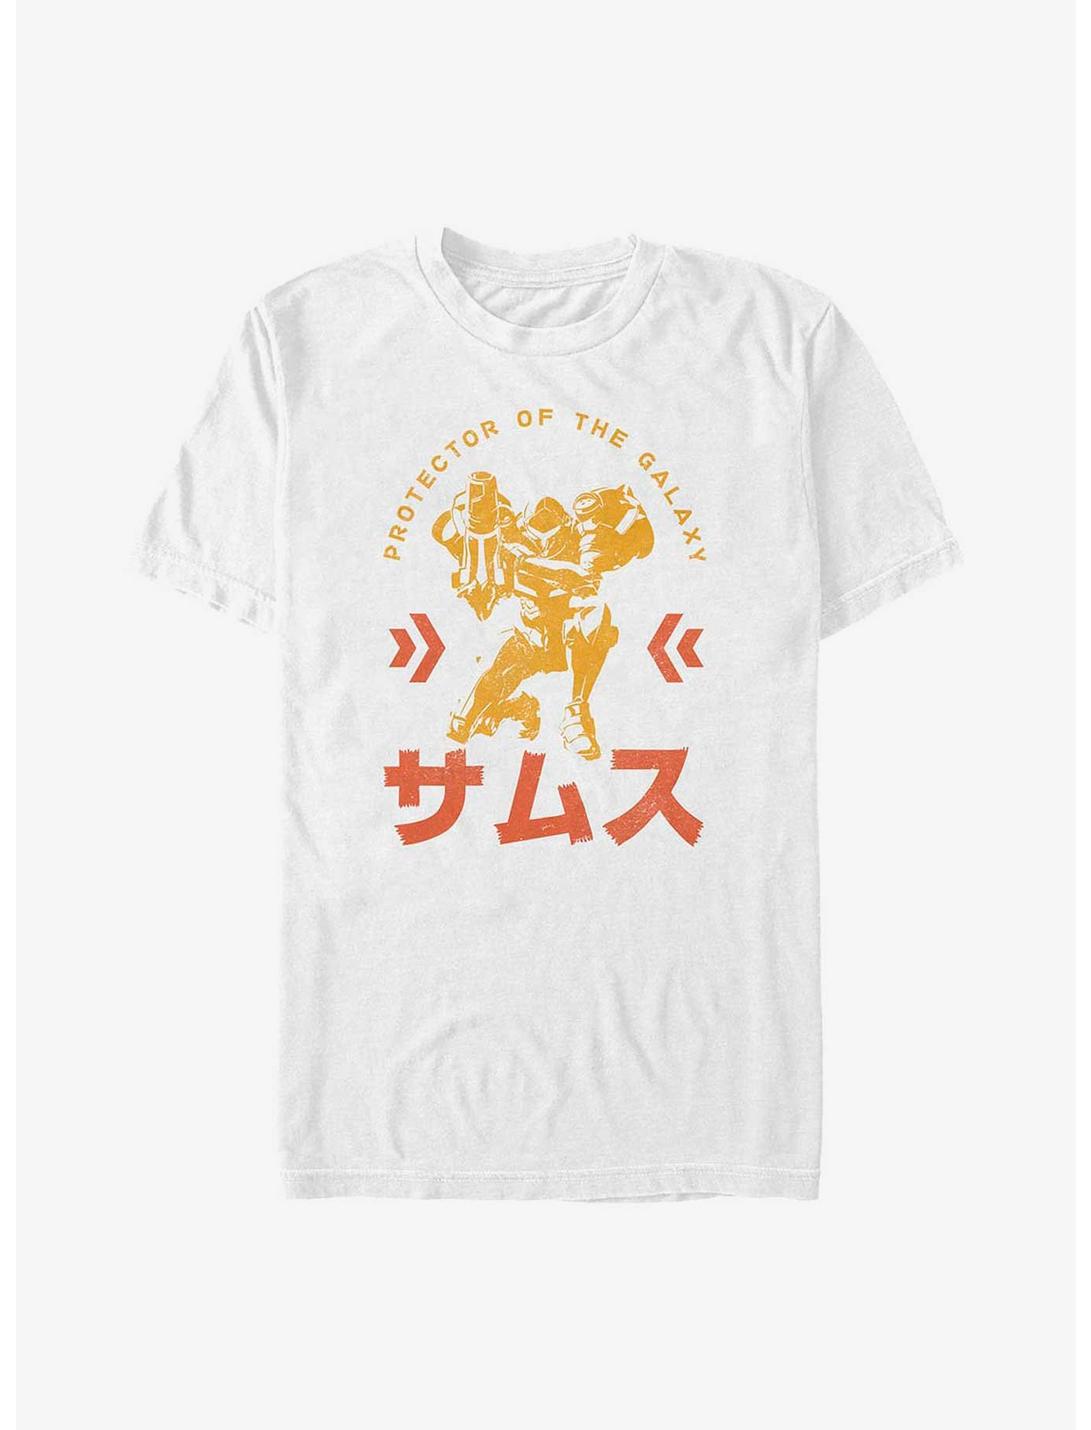 Nintendo Metroid Protector of the Galaxy T-Shirt, WHITE, hi-res